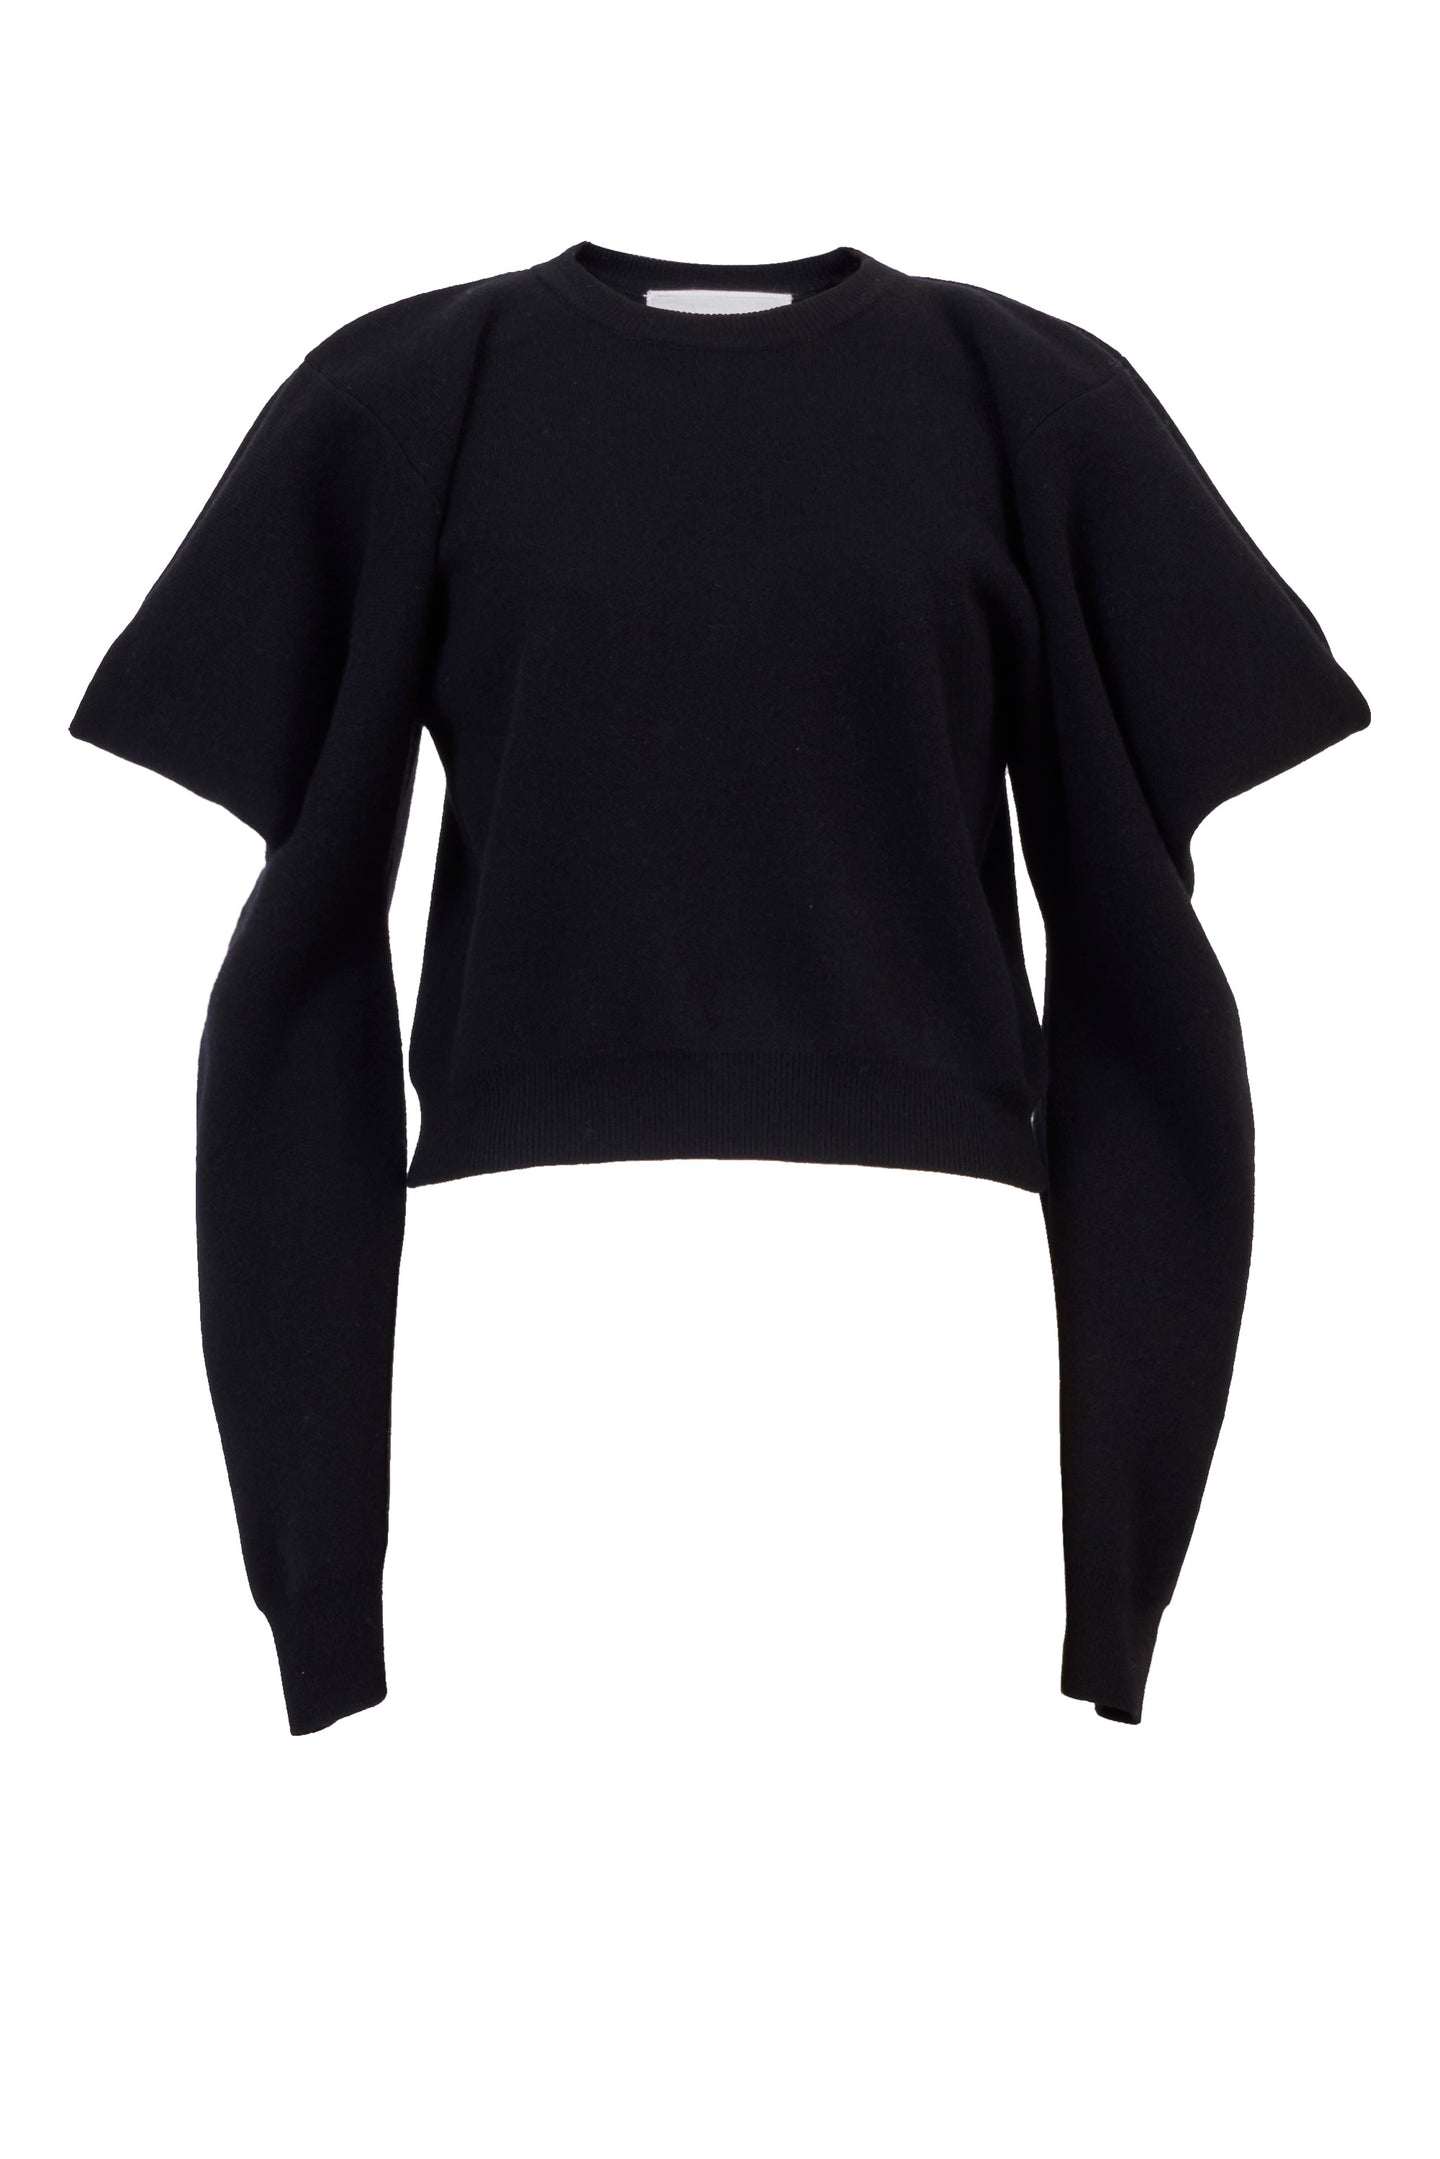 Wool Cashmere Knit Open Shoulder Top | Stone